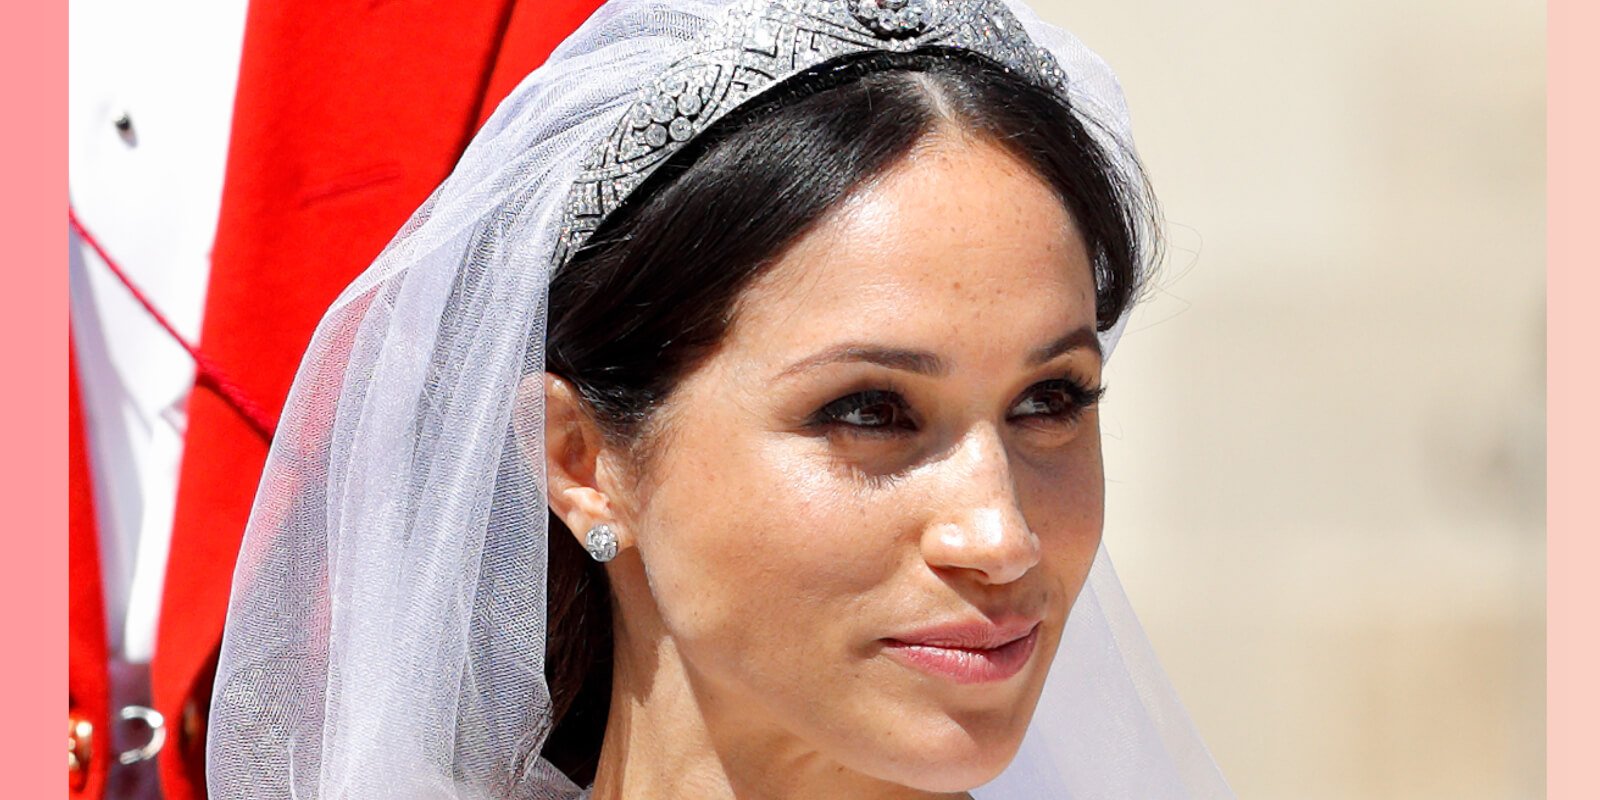 Meghan Markle wore Queen Mary's Diamond Bandeau Tiara for her wedding to Prince Harry in Apr. 2018.